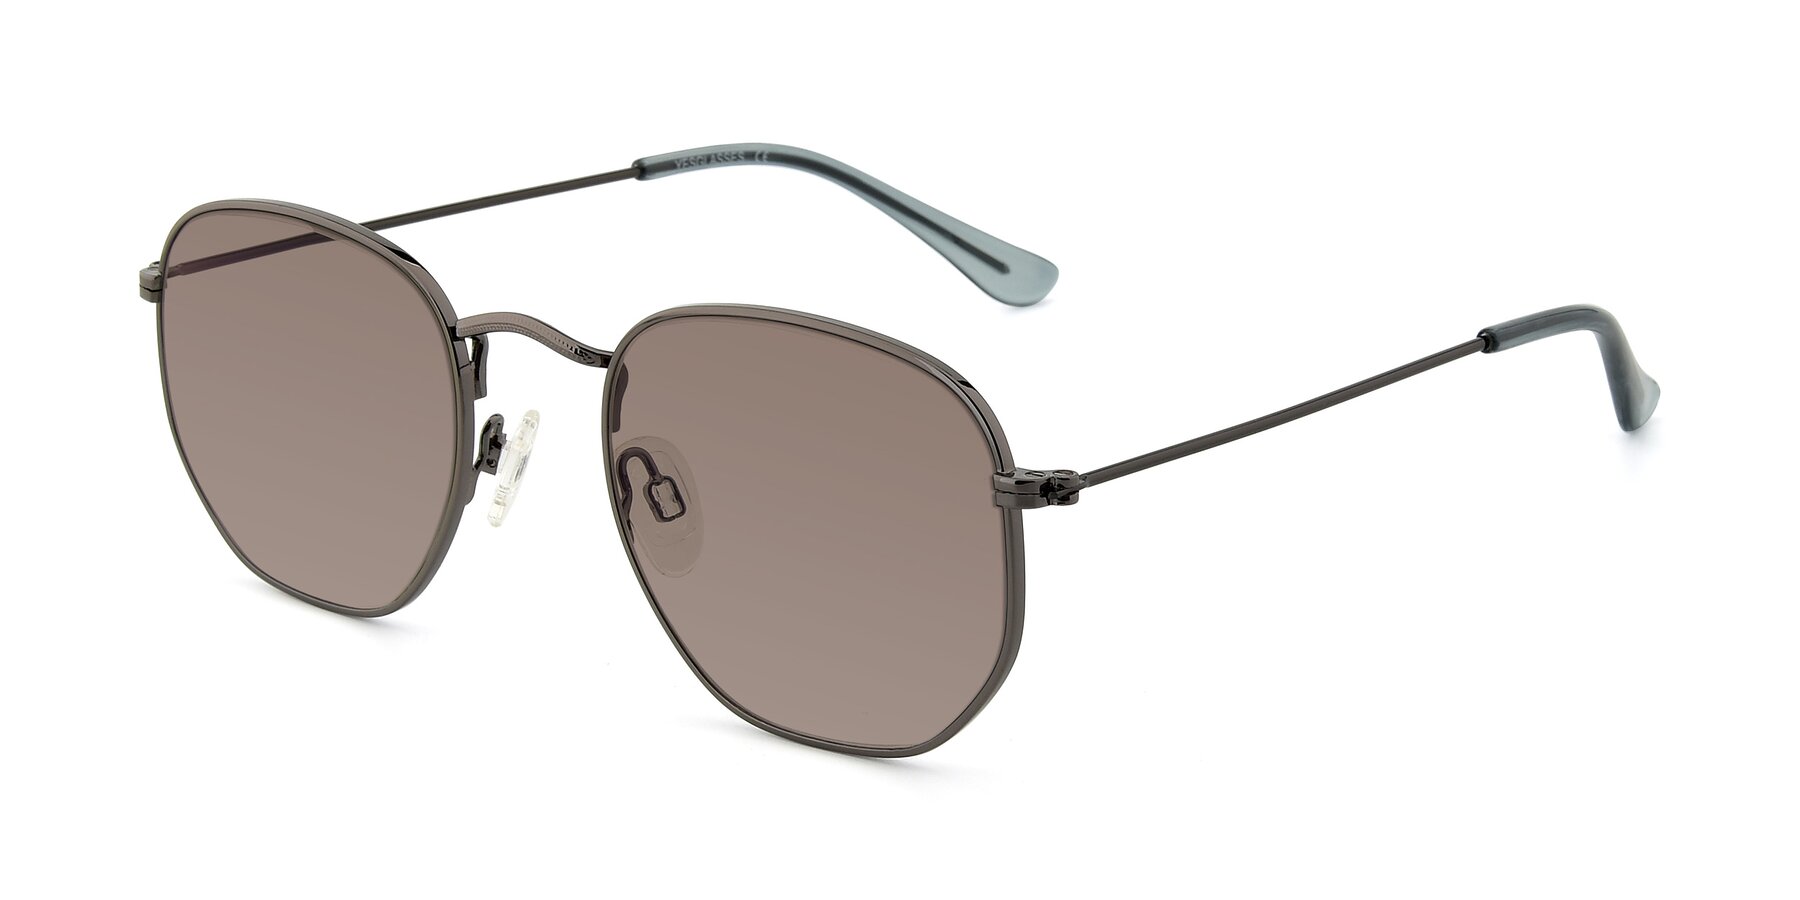 Angle of SSR1944 in Grey with Medium Brown Tinted Lenses